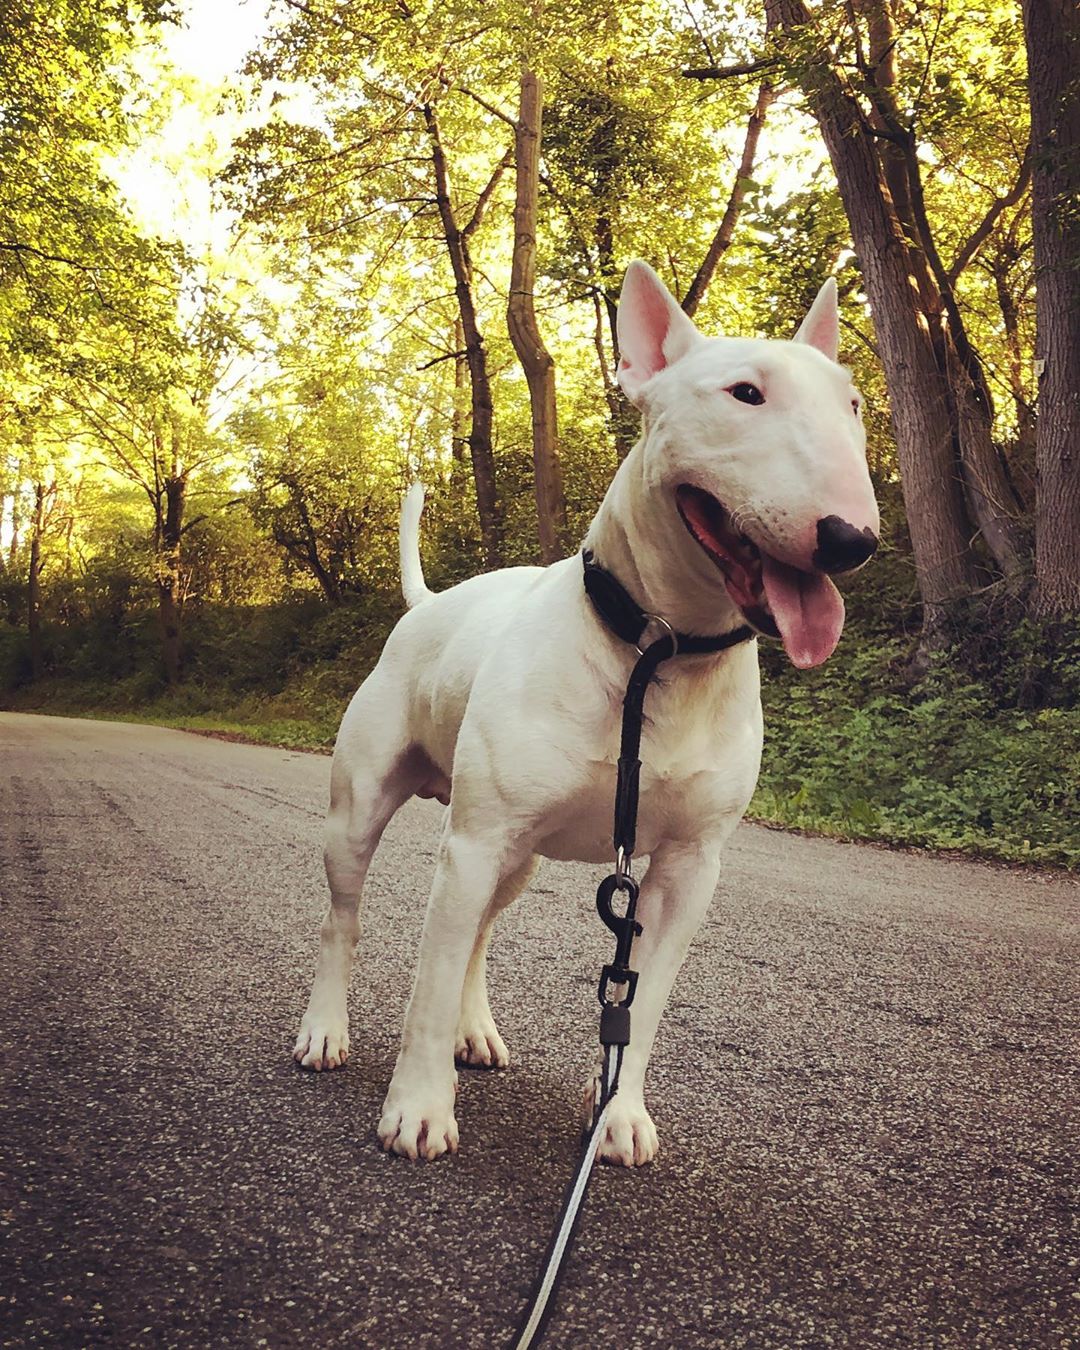 A Bull Terrier standing on the road